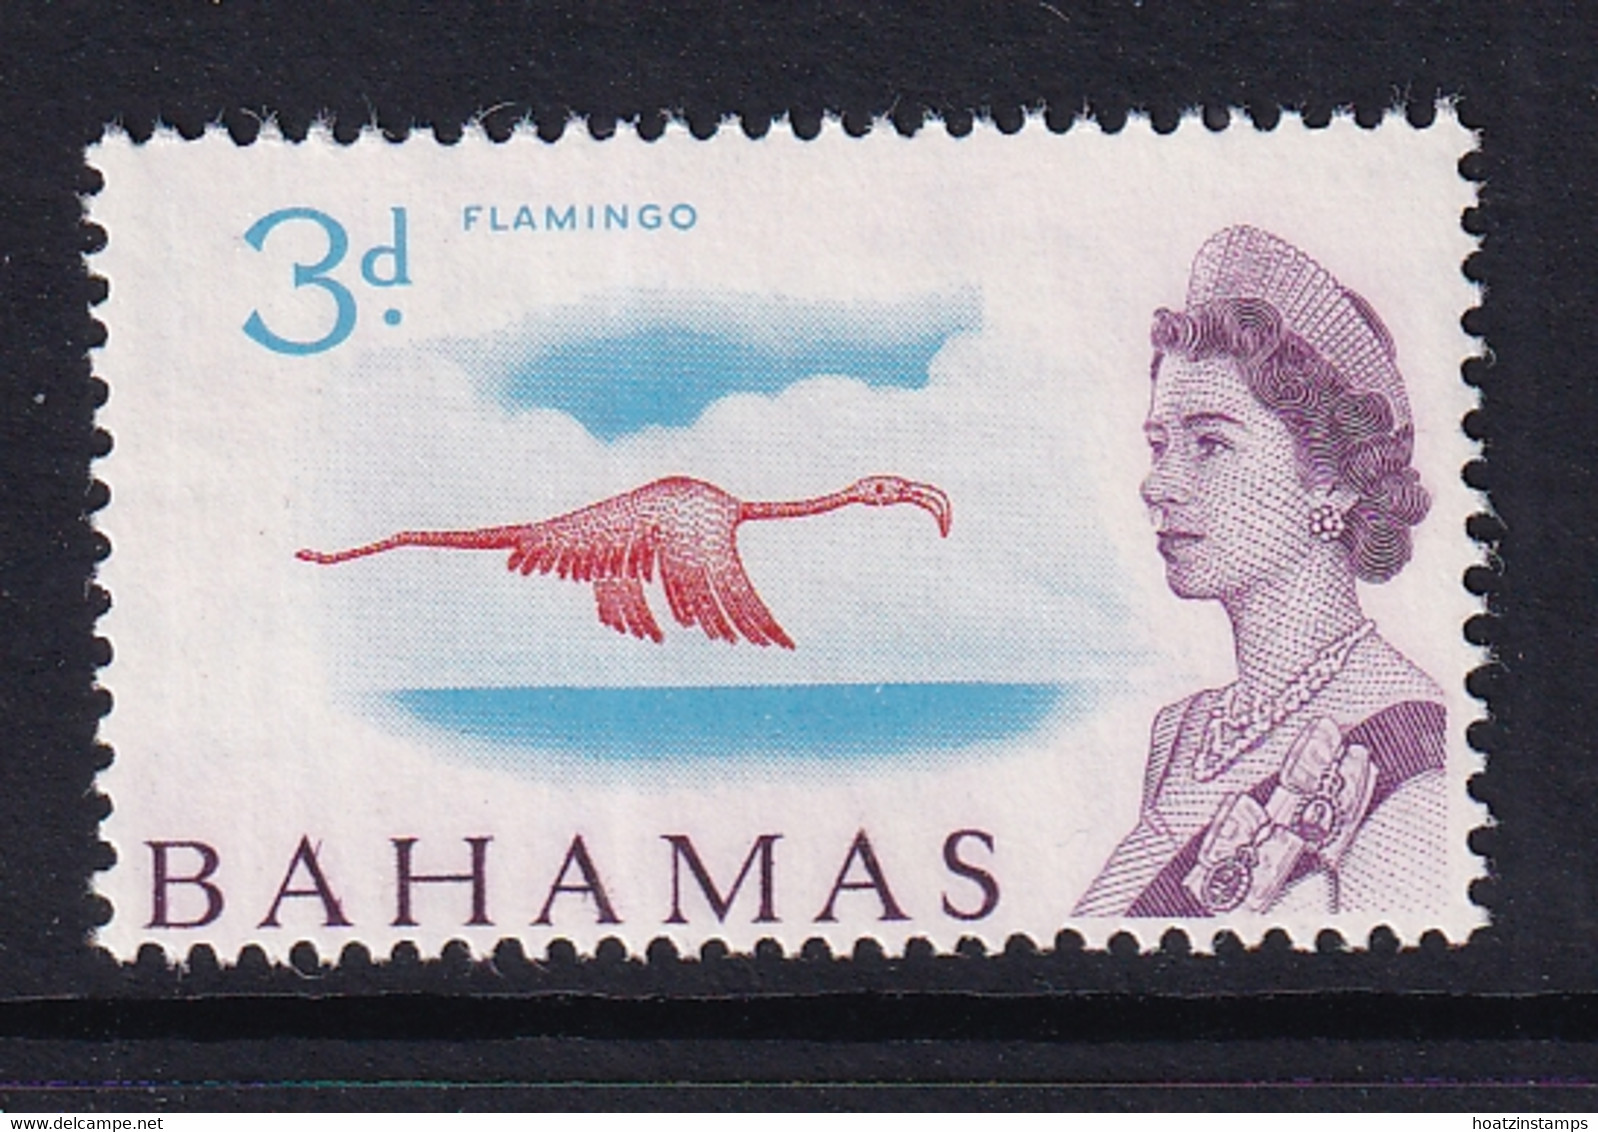 Bahamas: 1965   QE II - Pictorial    SG251   3d    MNH - 1963-1973 Ministerial Government